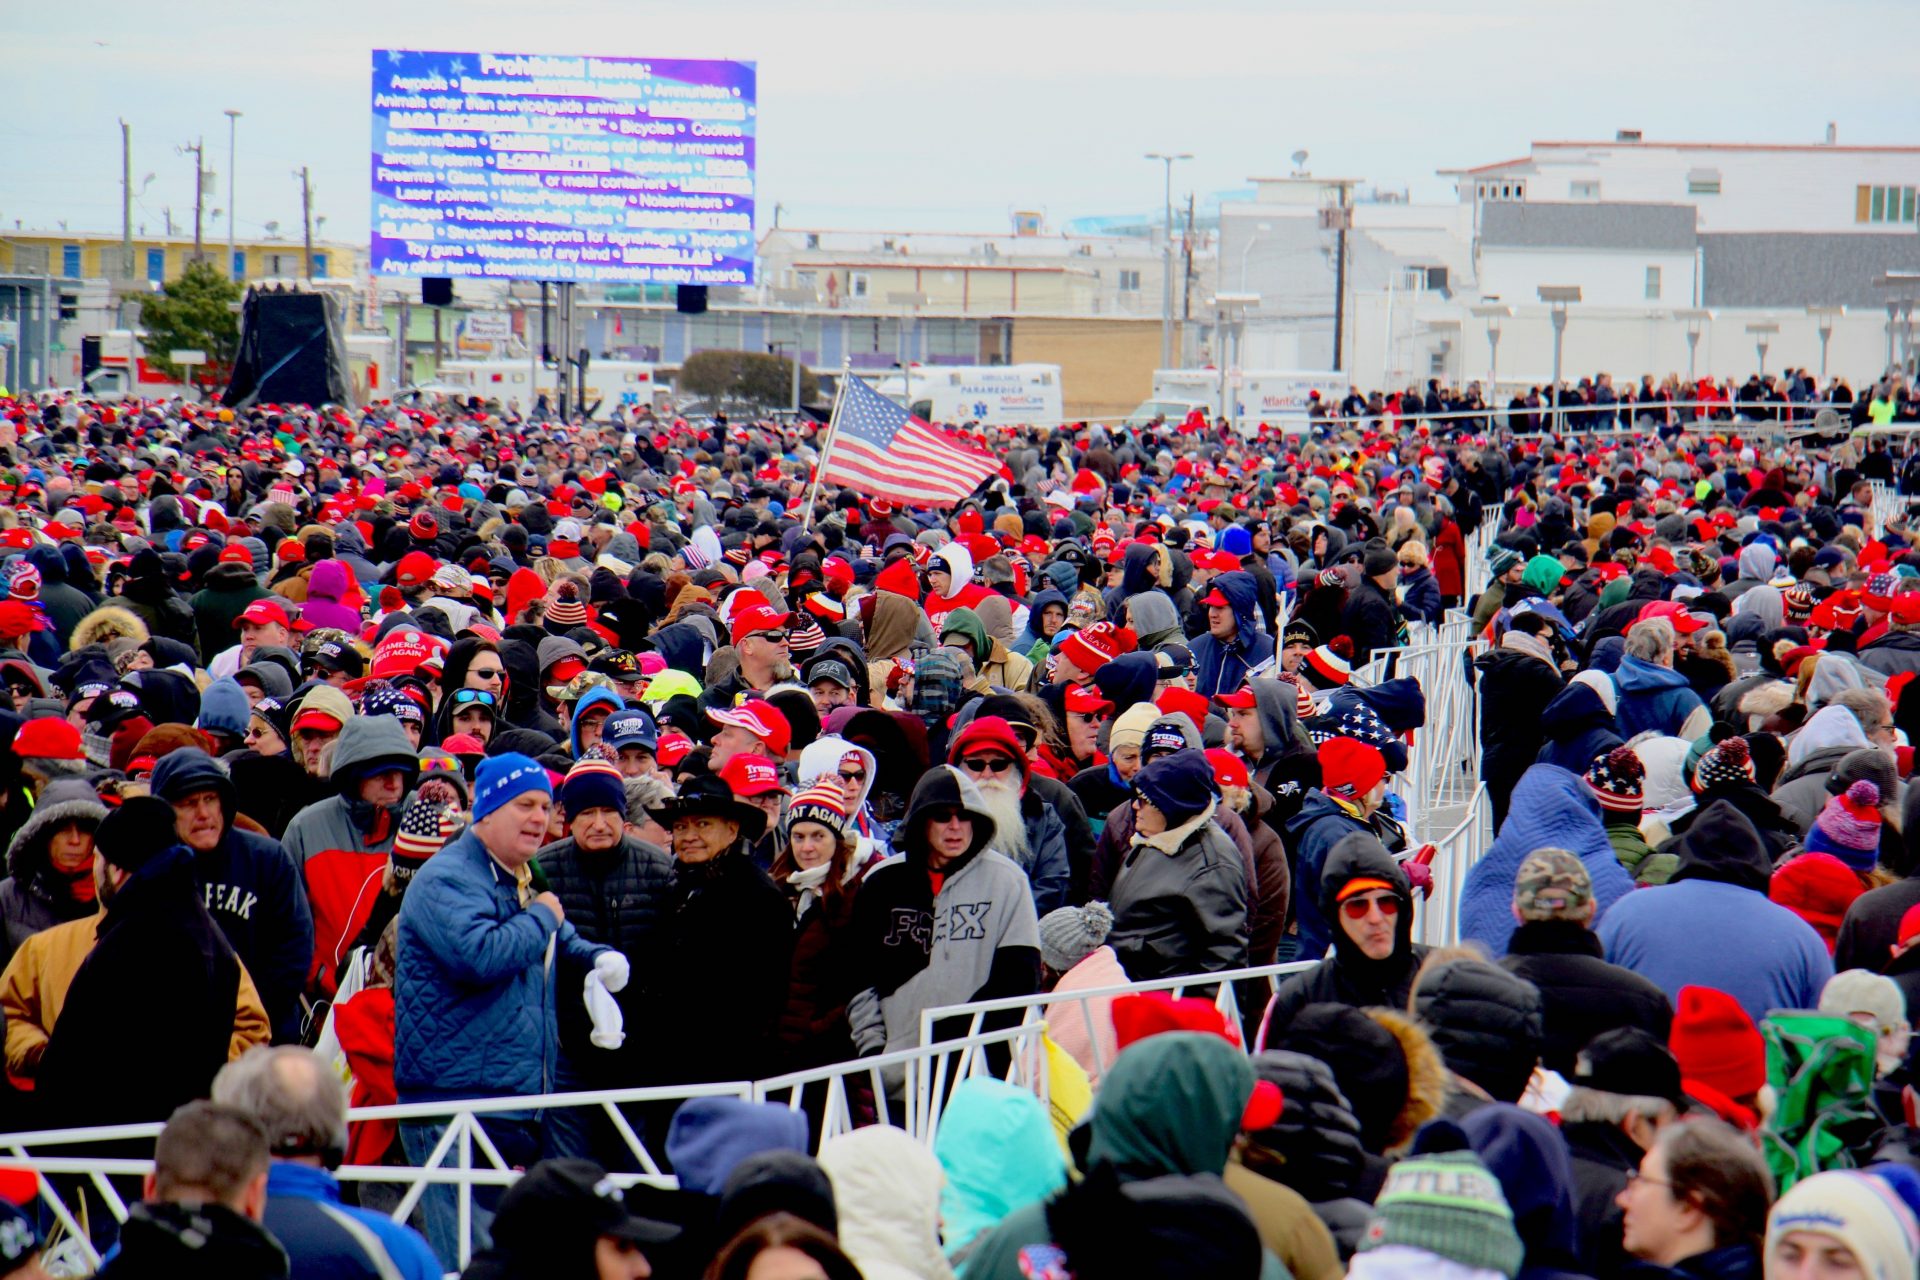 Thousands line up outside the Wildwoods Convention Center to see President Donald Trump. (Emma Lee/WHYY)